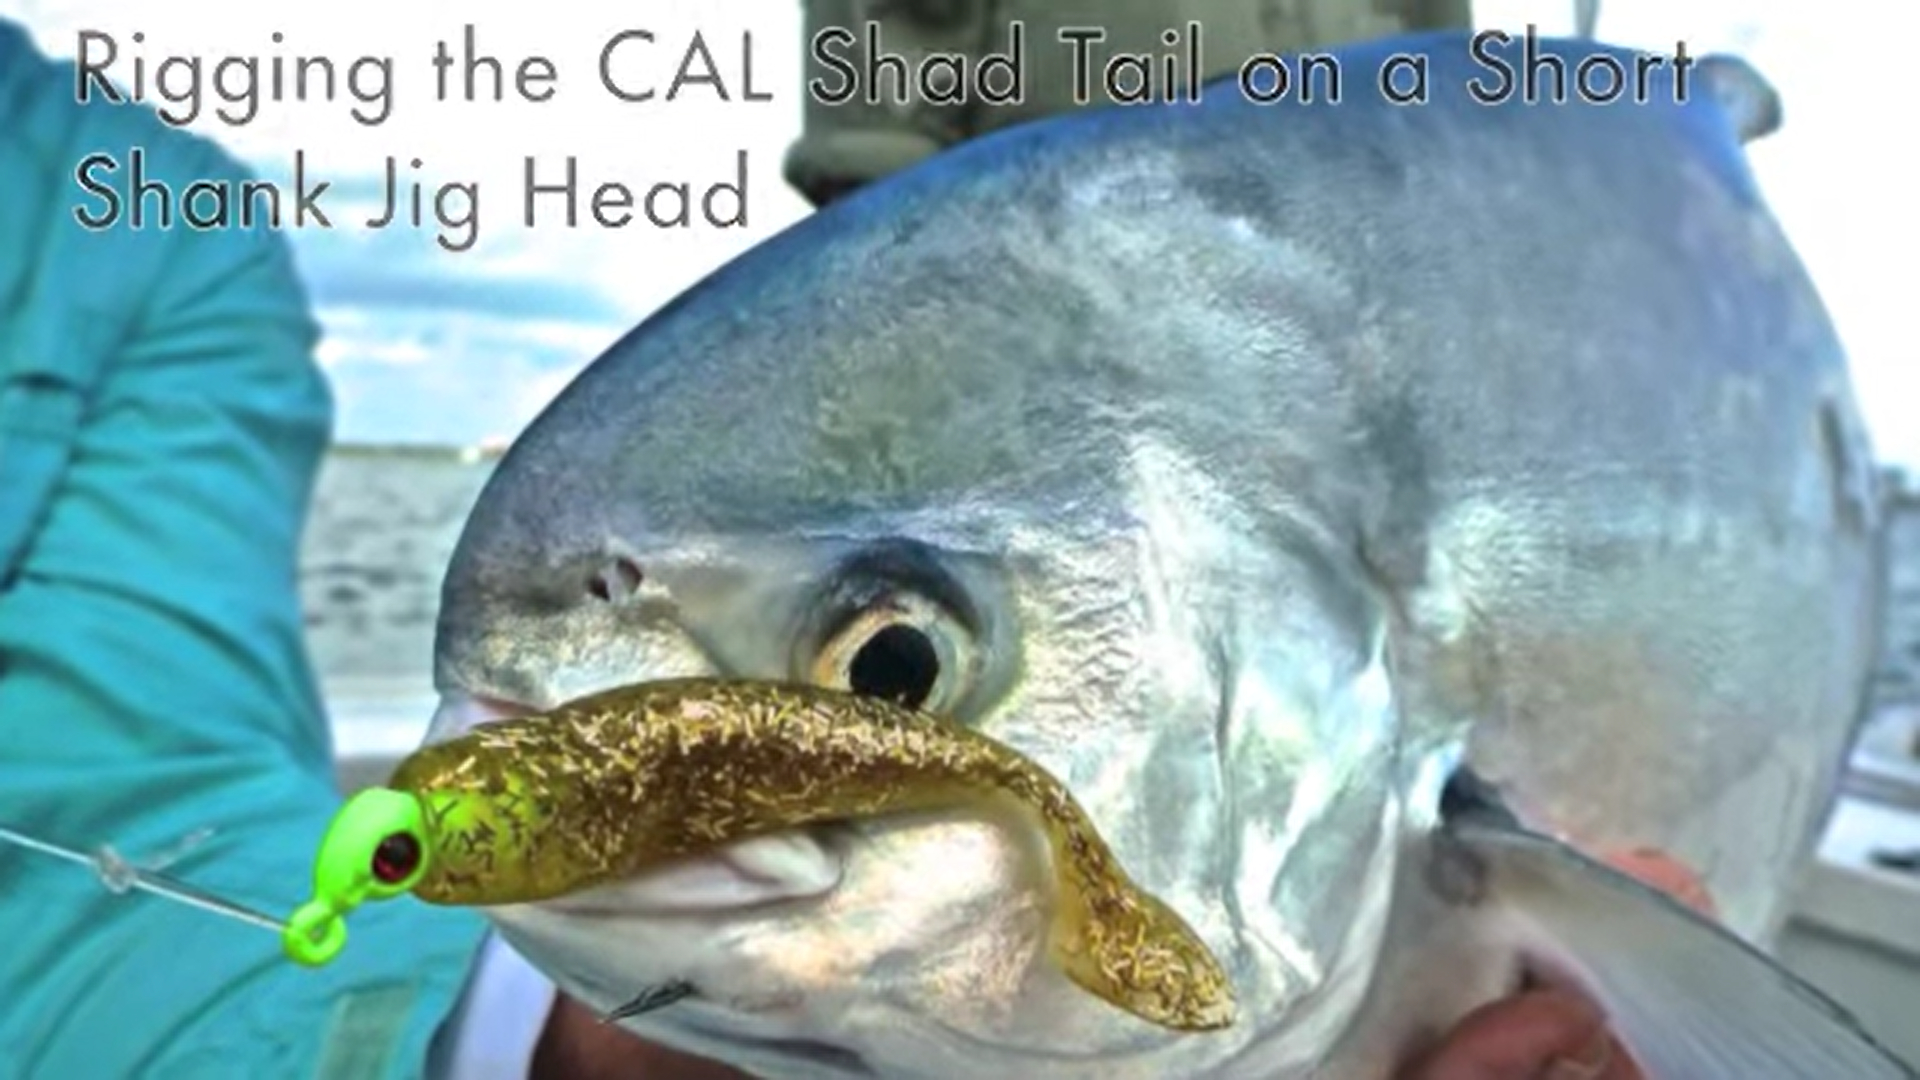 D.O.A. C.A.L. 3-inch Shad Tail Video